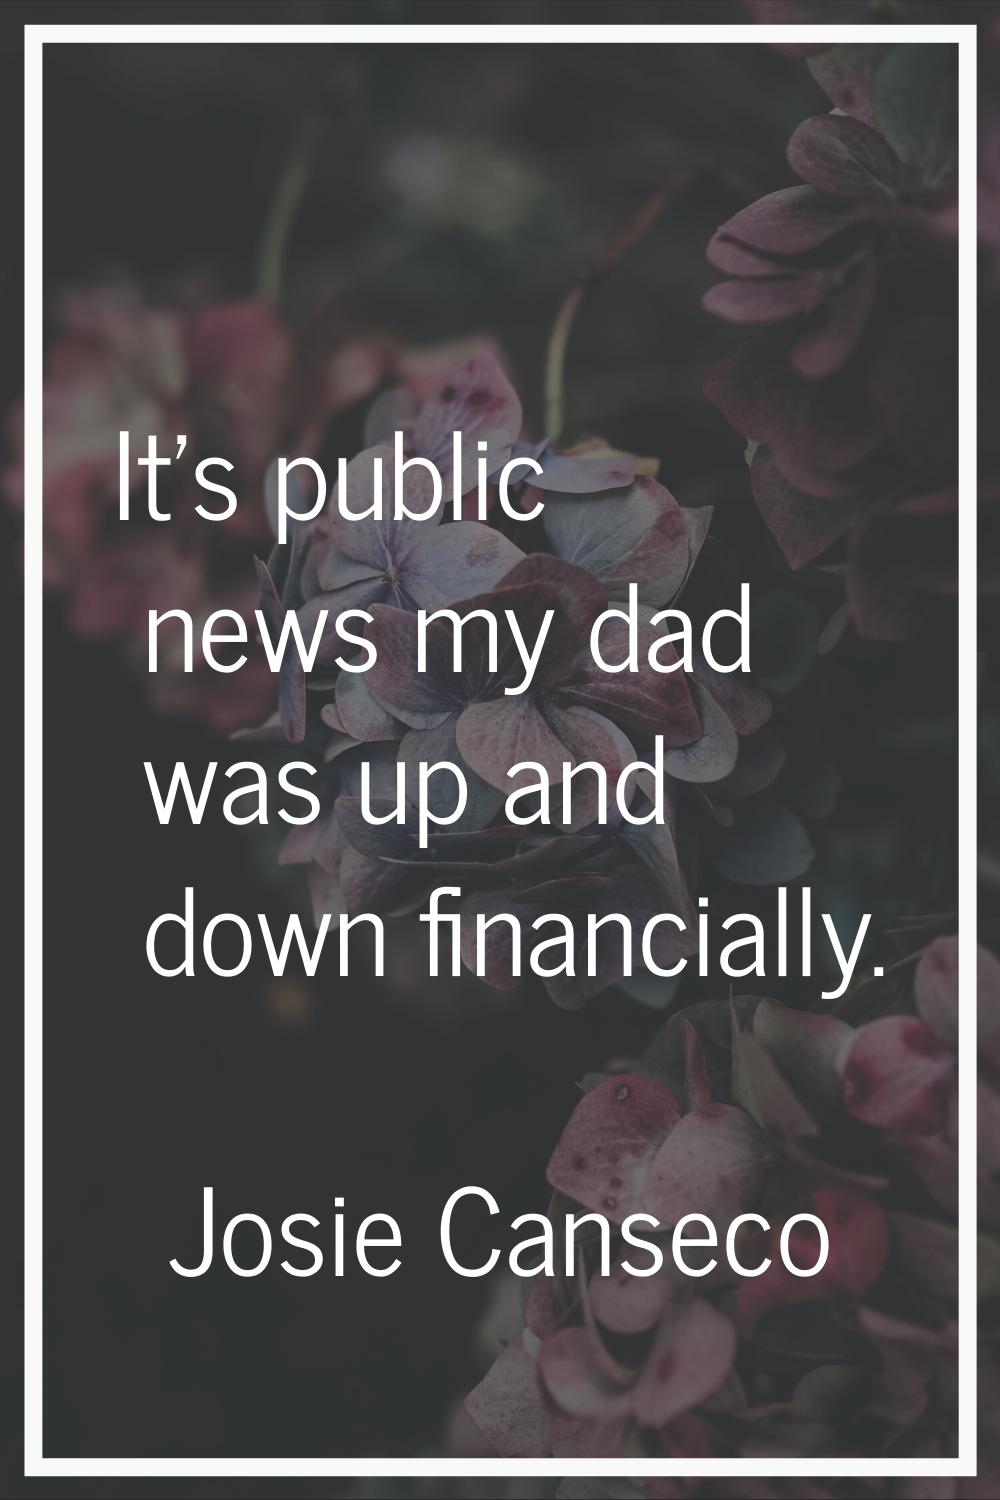 It's public news my dad was up and down financially.